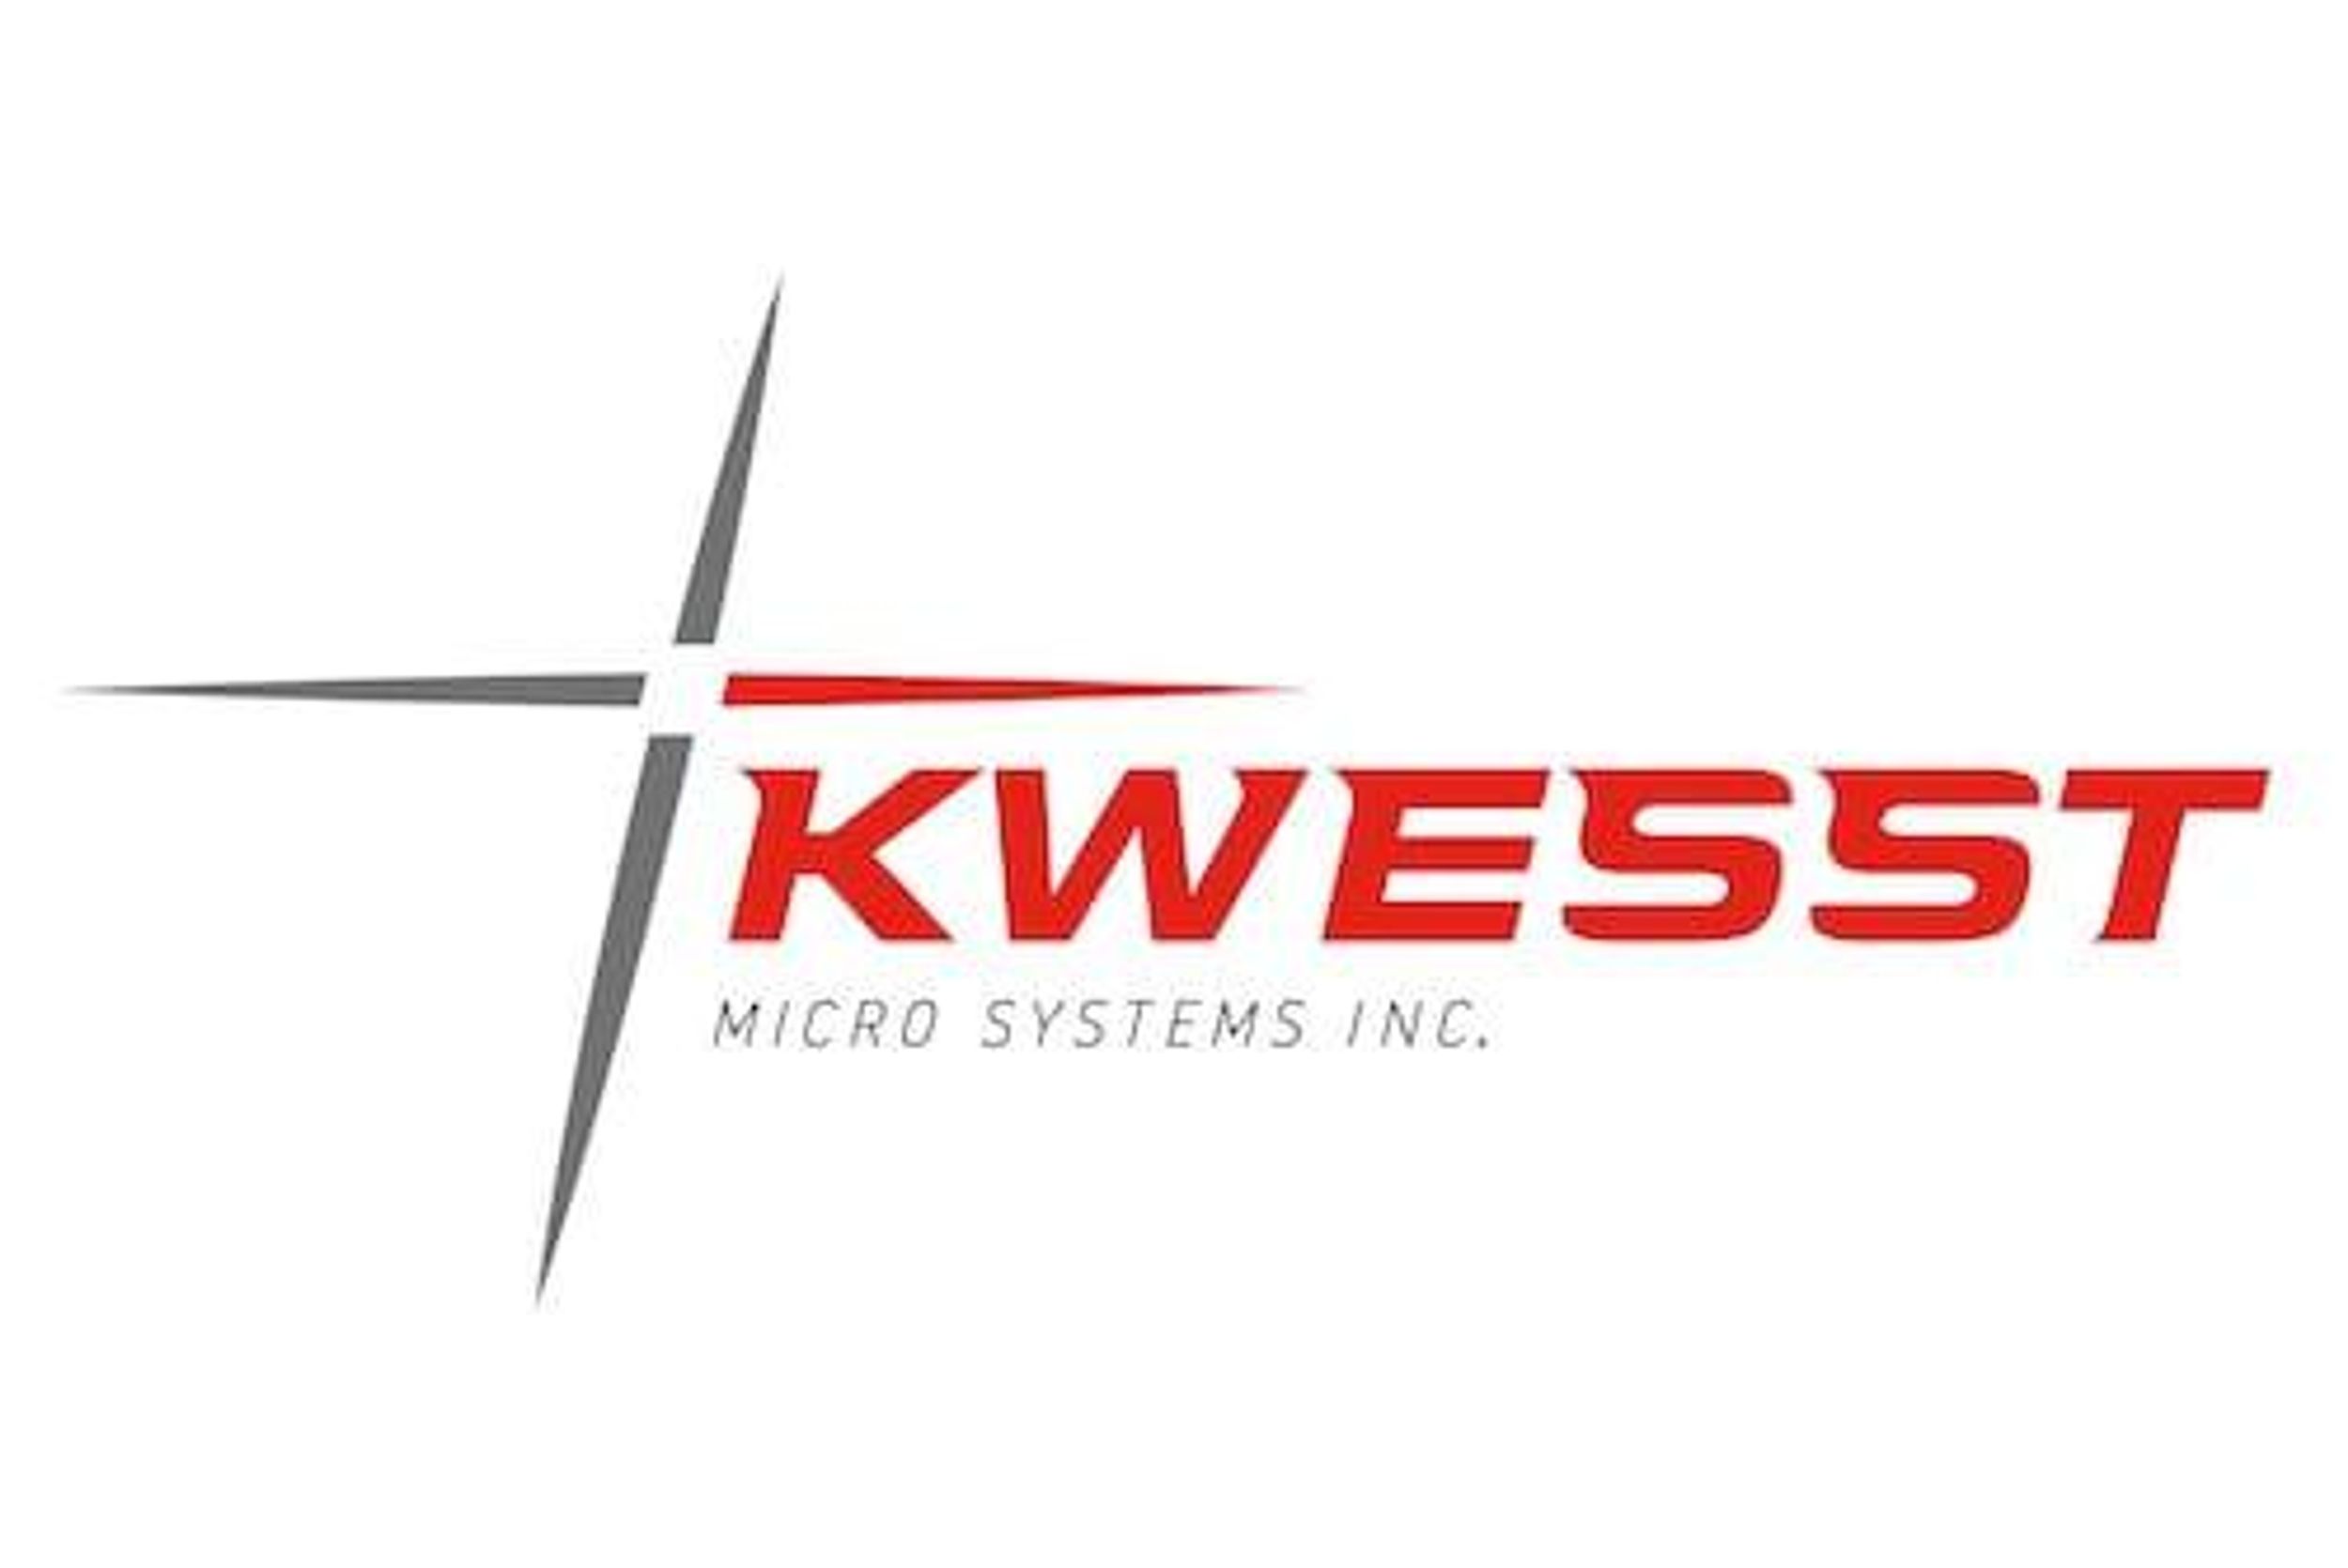 Brandon Tatum to Headline KWESST Non-Lethal Product Launch At 2022 SHOT Show